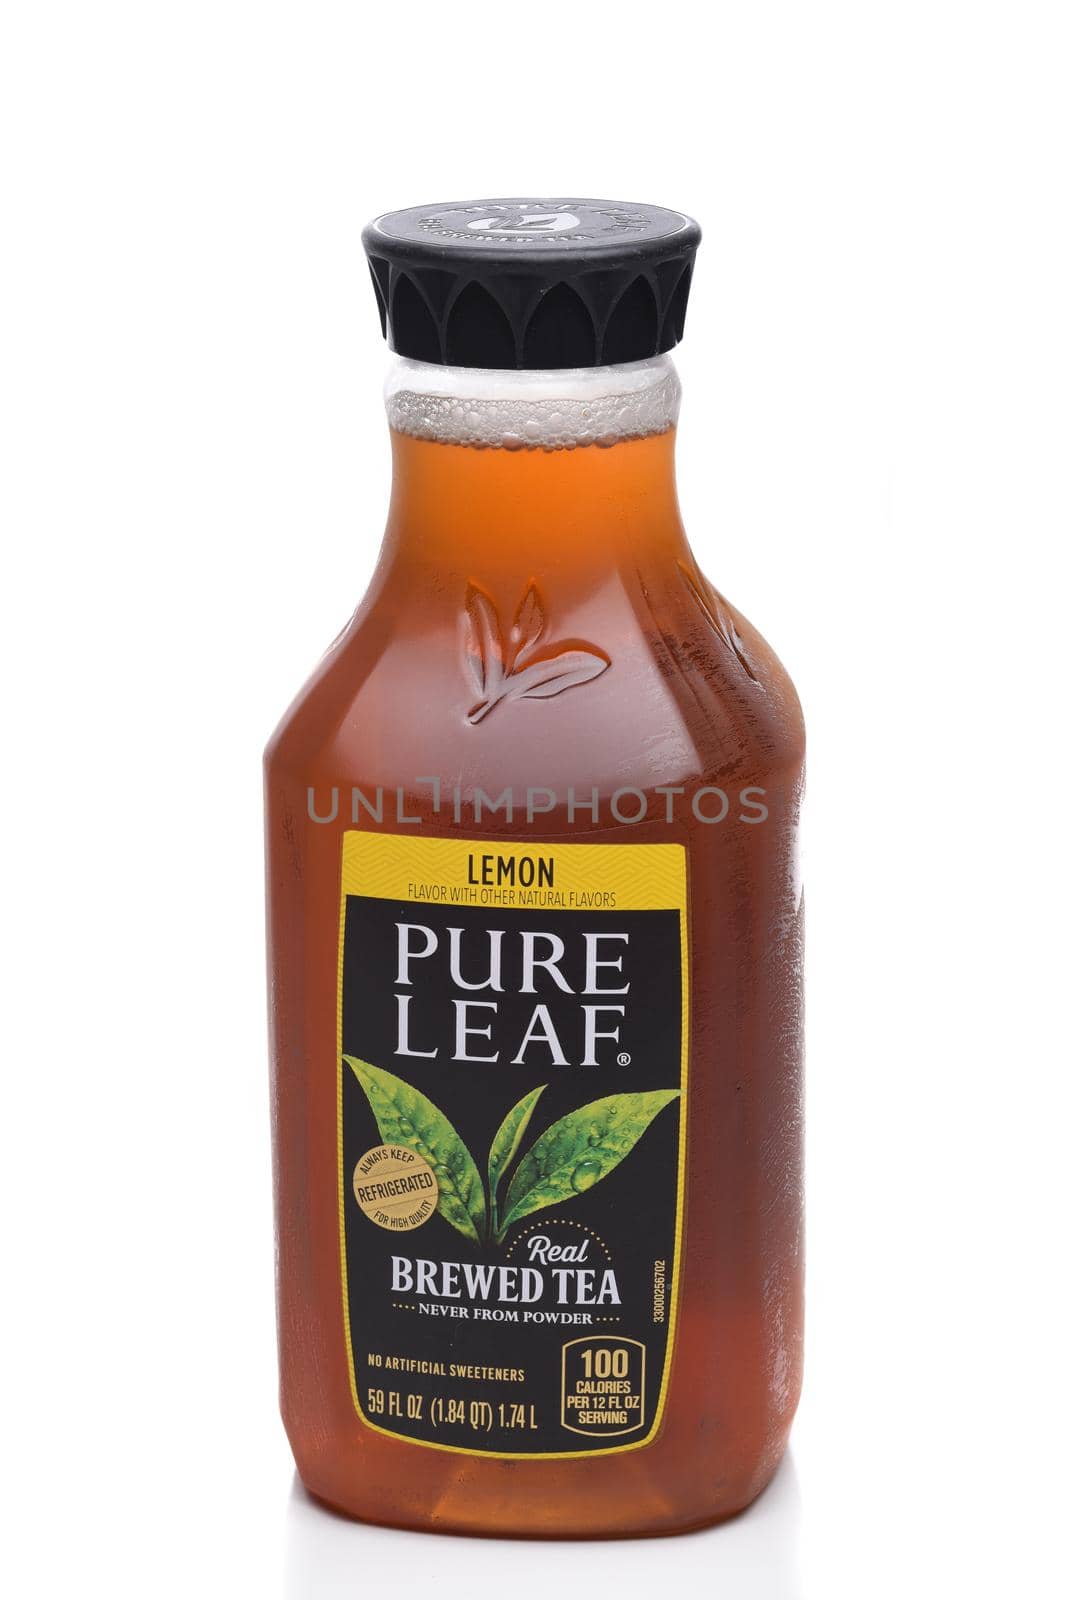 IRVINE, CALIFORNIA - 25 MAY 2020: A bottle of Pure Leaf Lemon Real Brewed Tea. by sCukrov